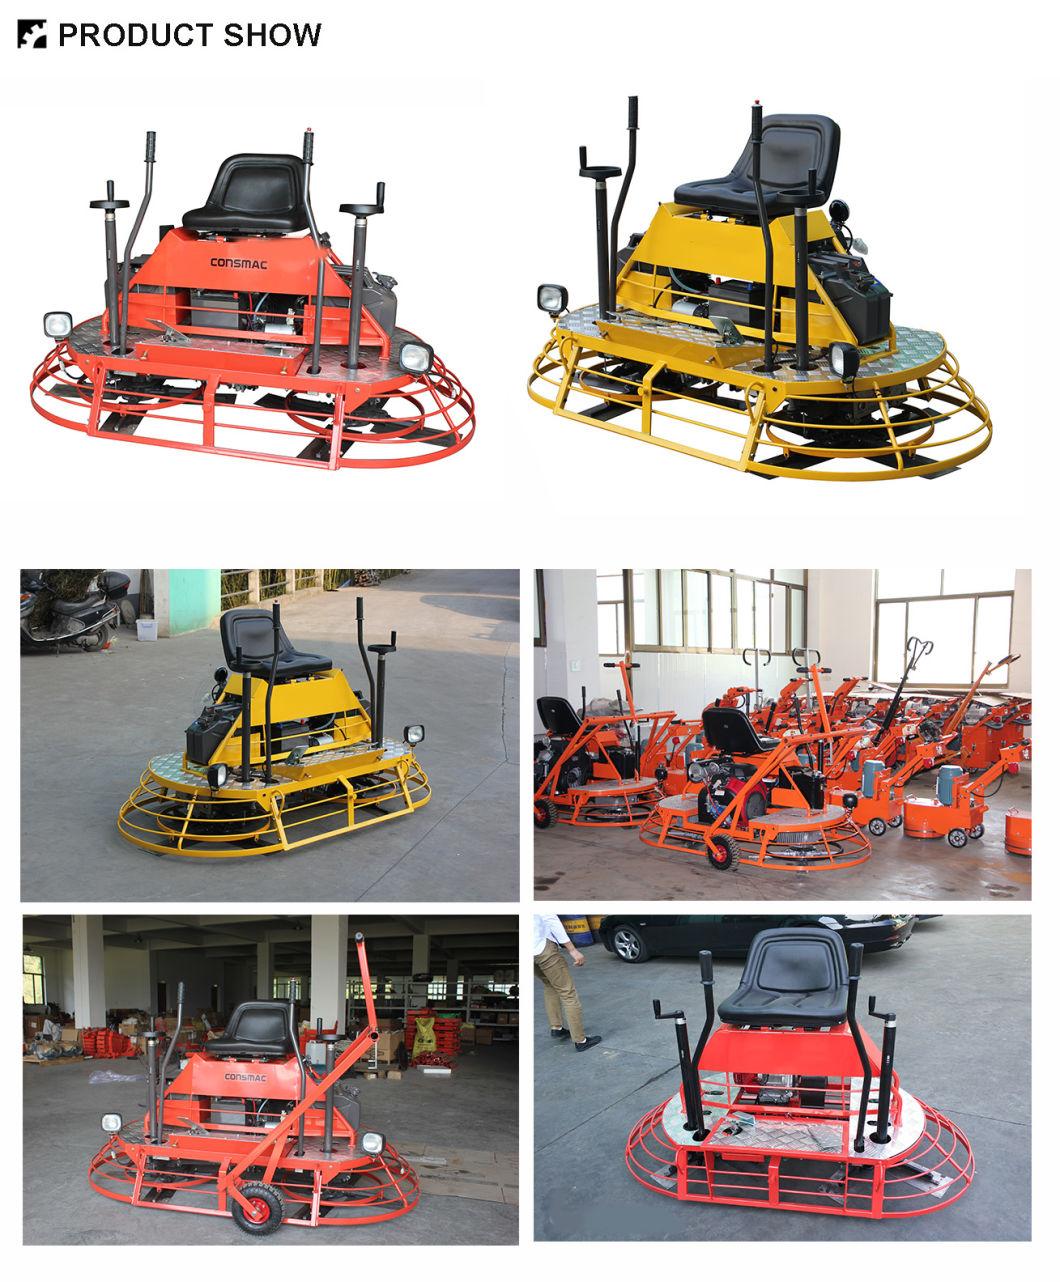 36" Inch Good Price Ride on Power Trowel Machine Price with Ce